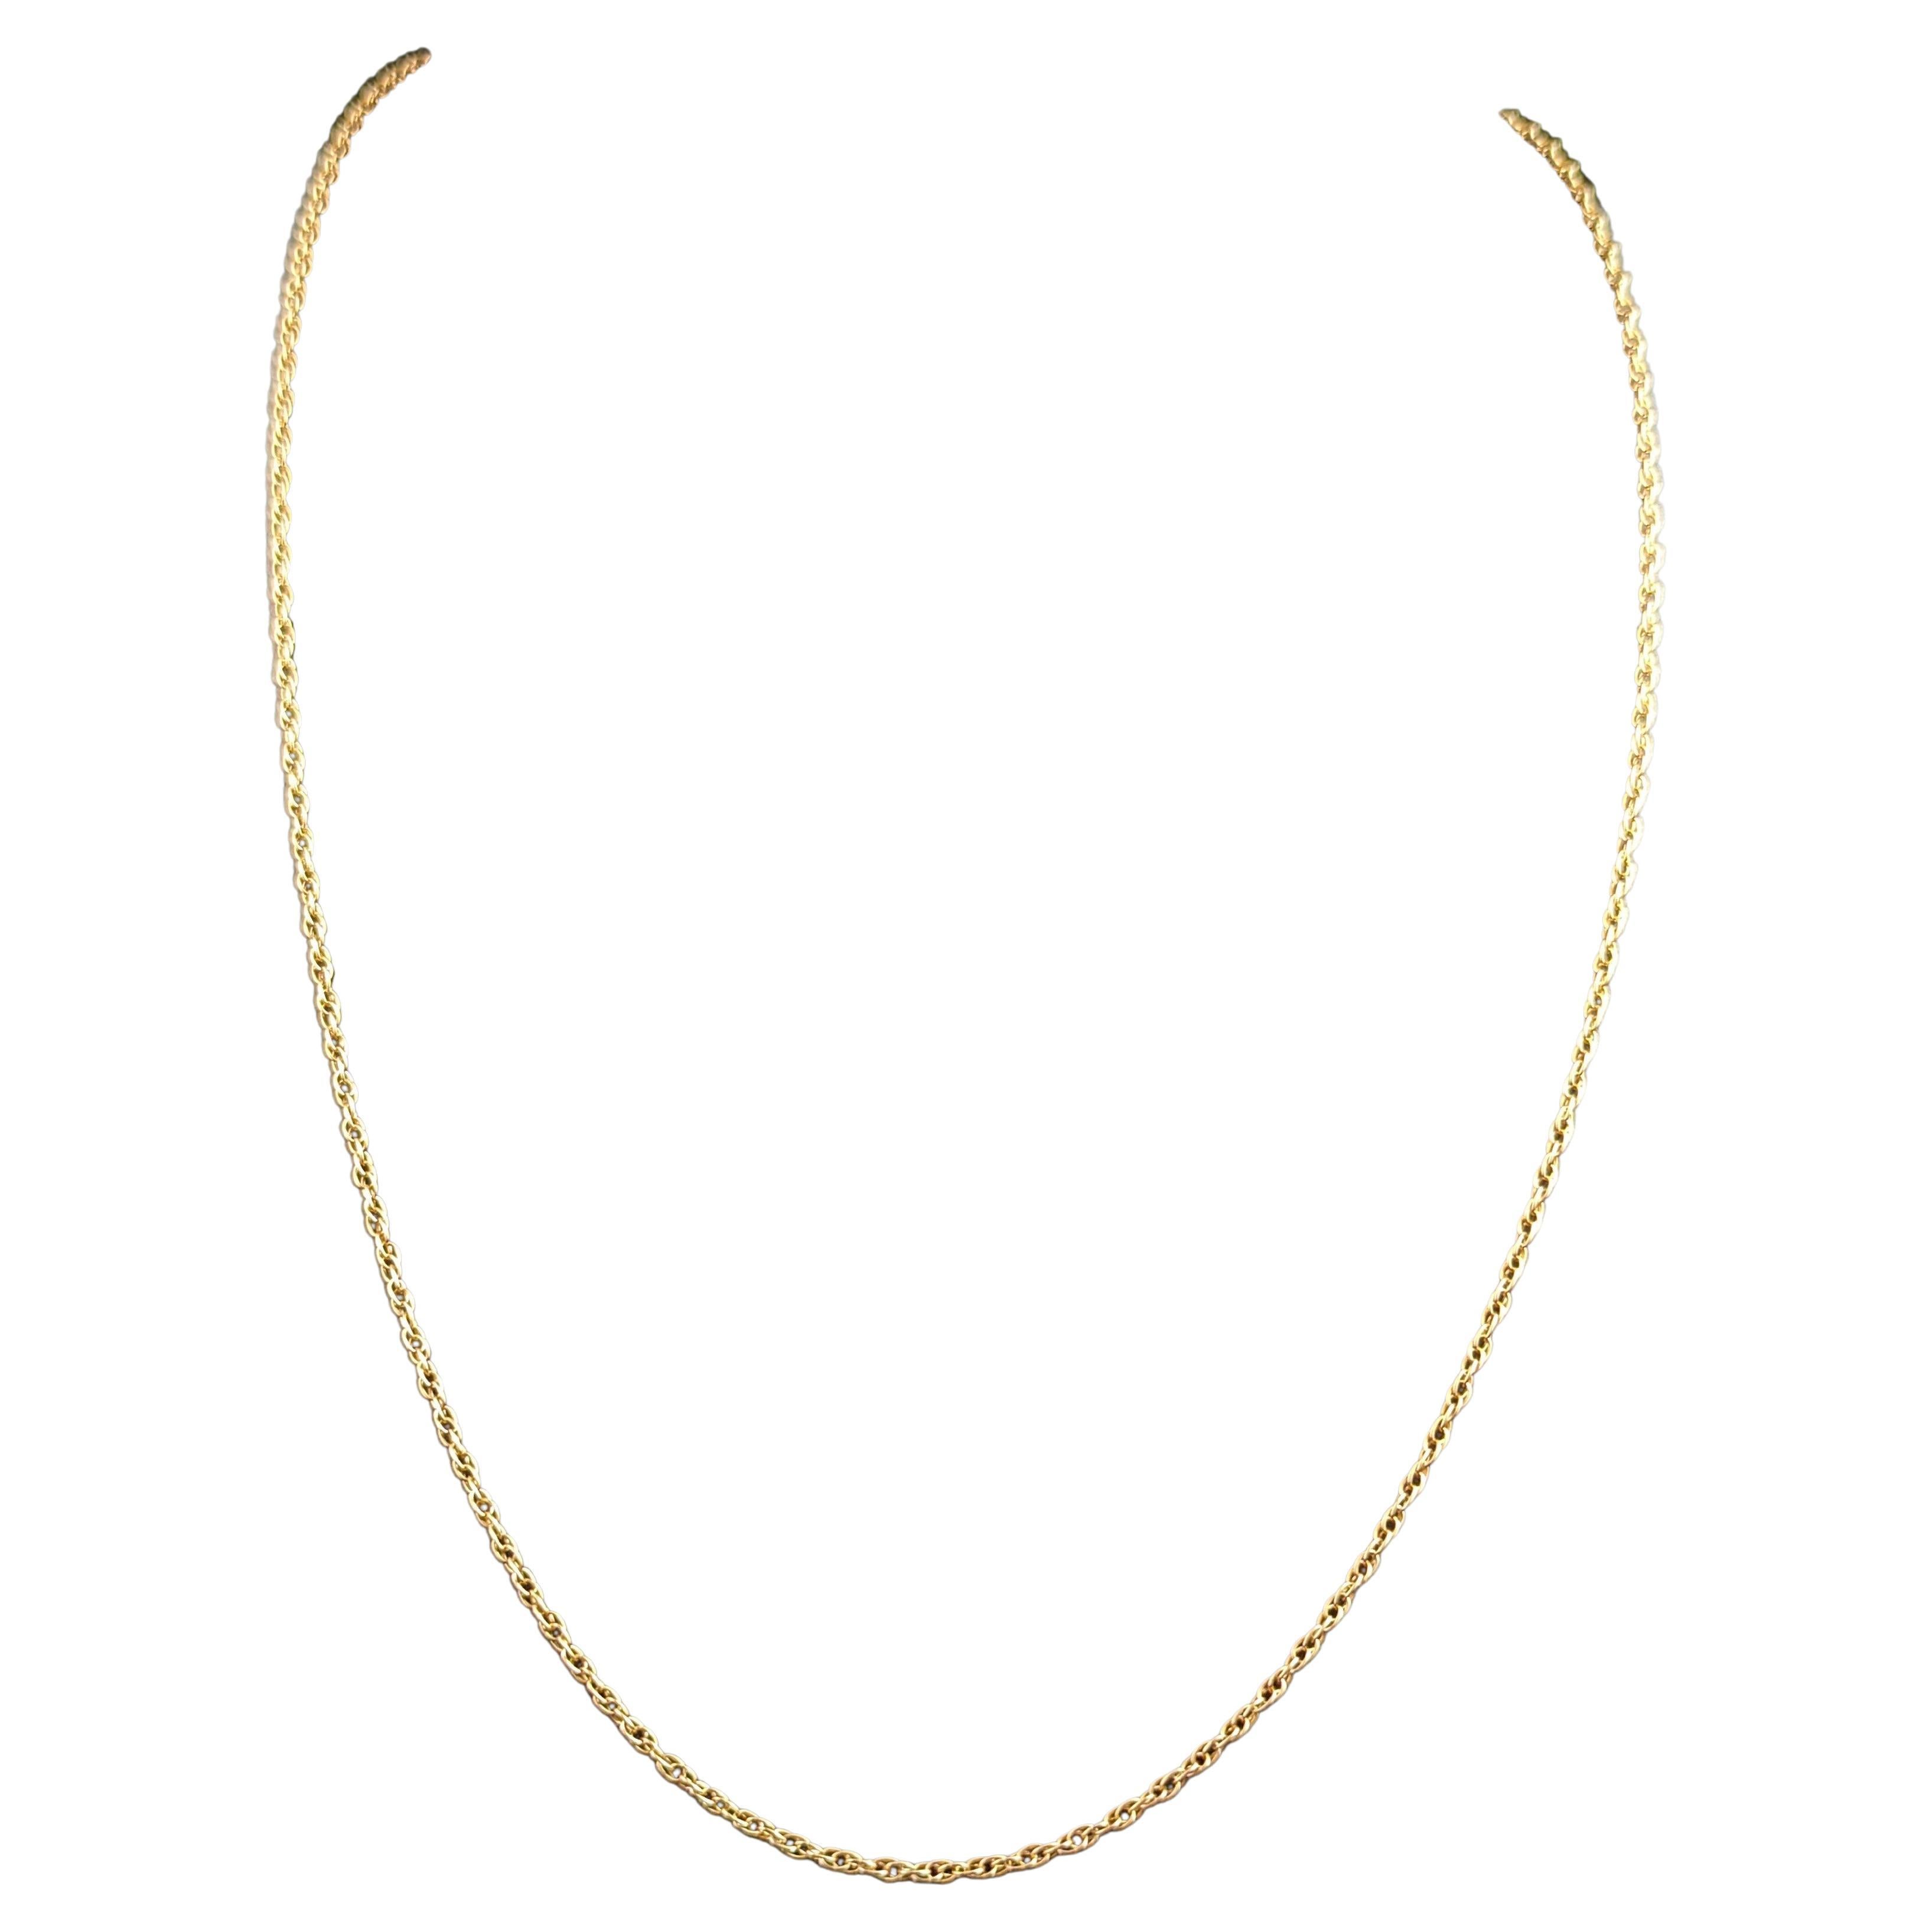 Vintage 9k Yellow Gold Fancy Link Chain Necklace, Open Rope Chain